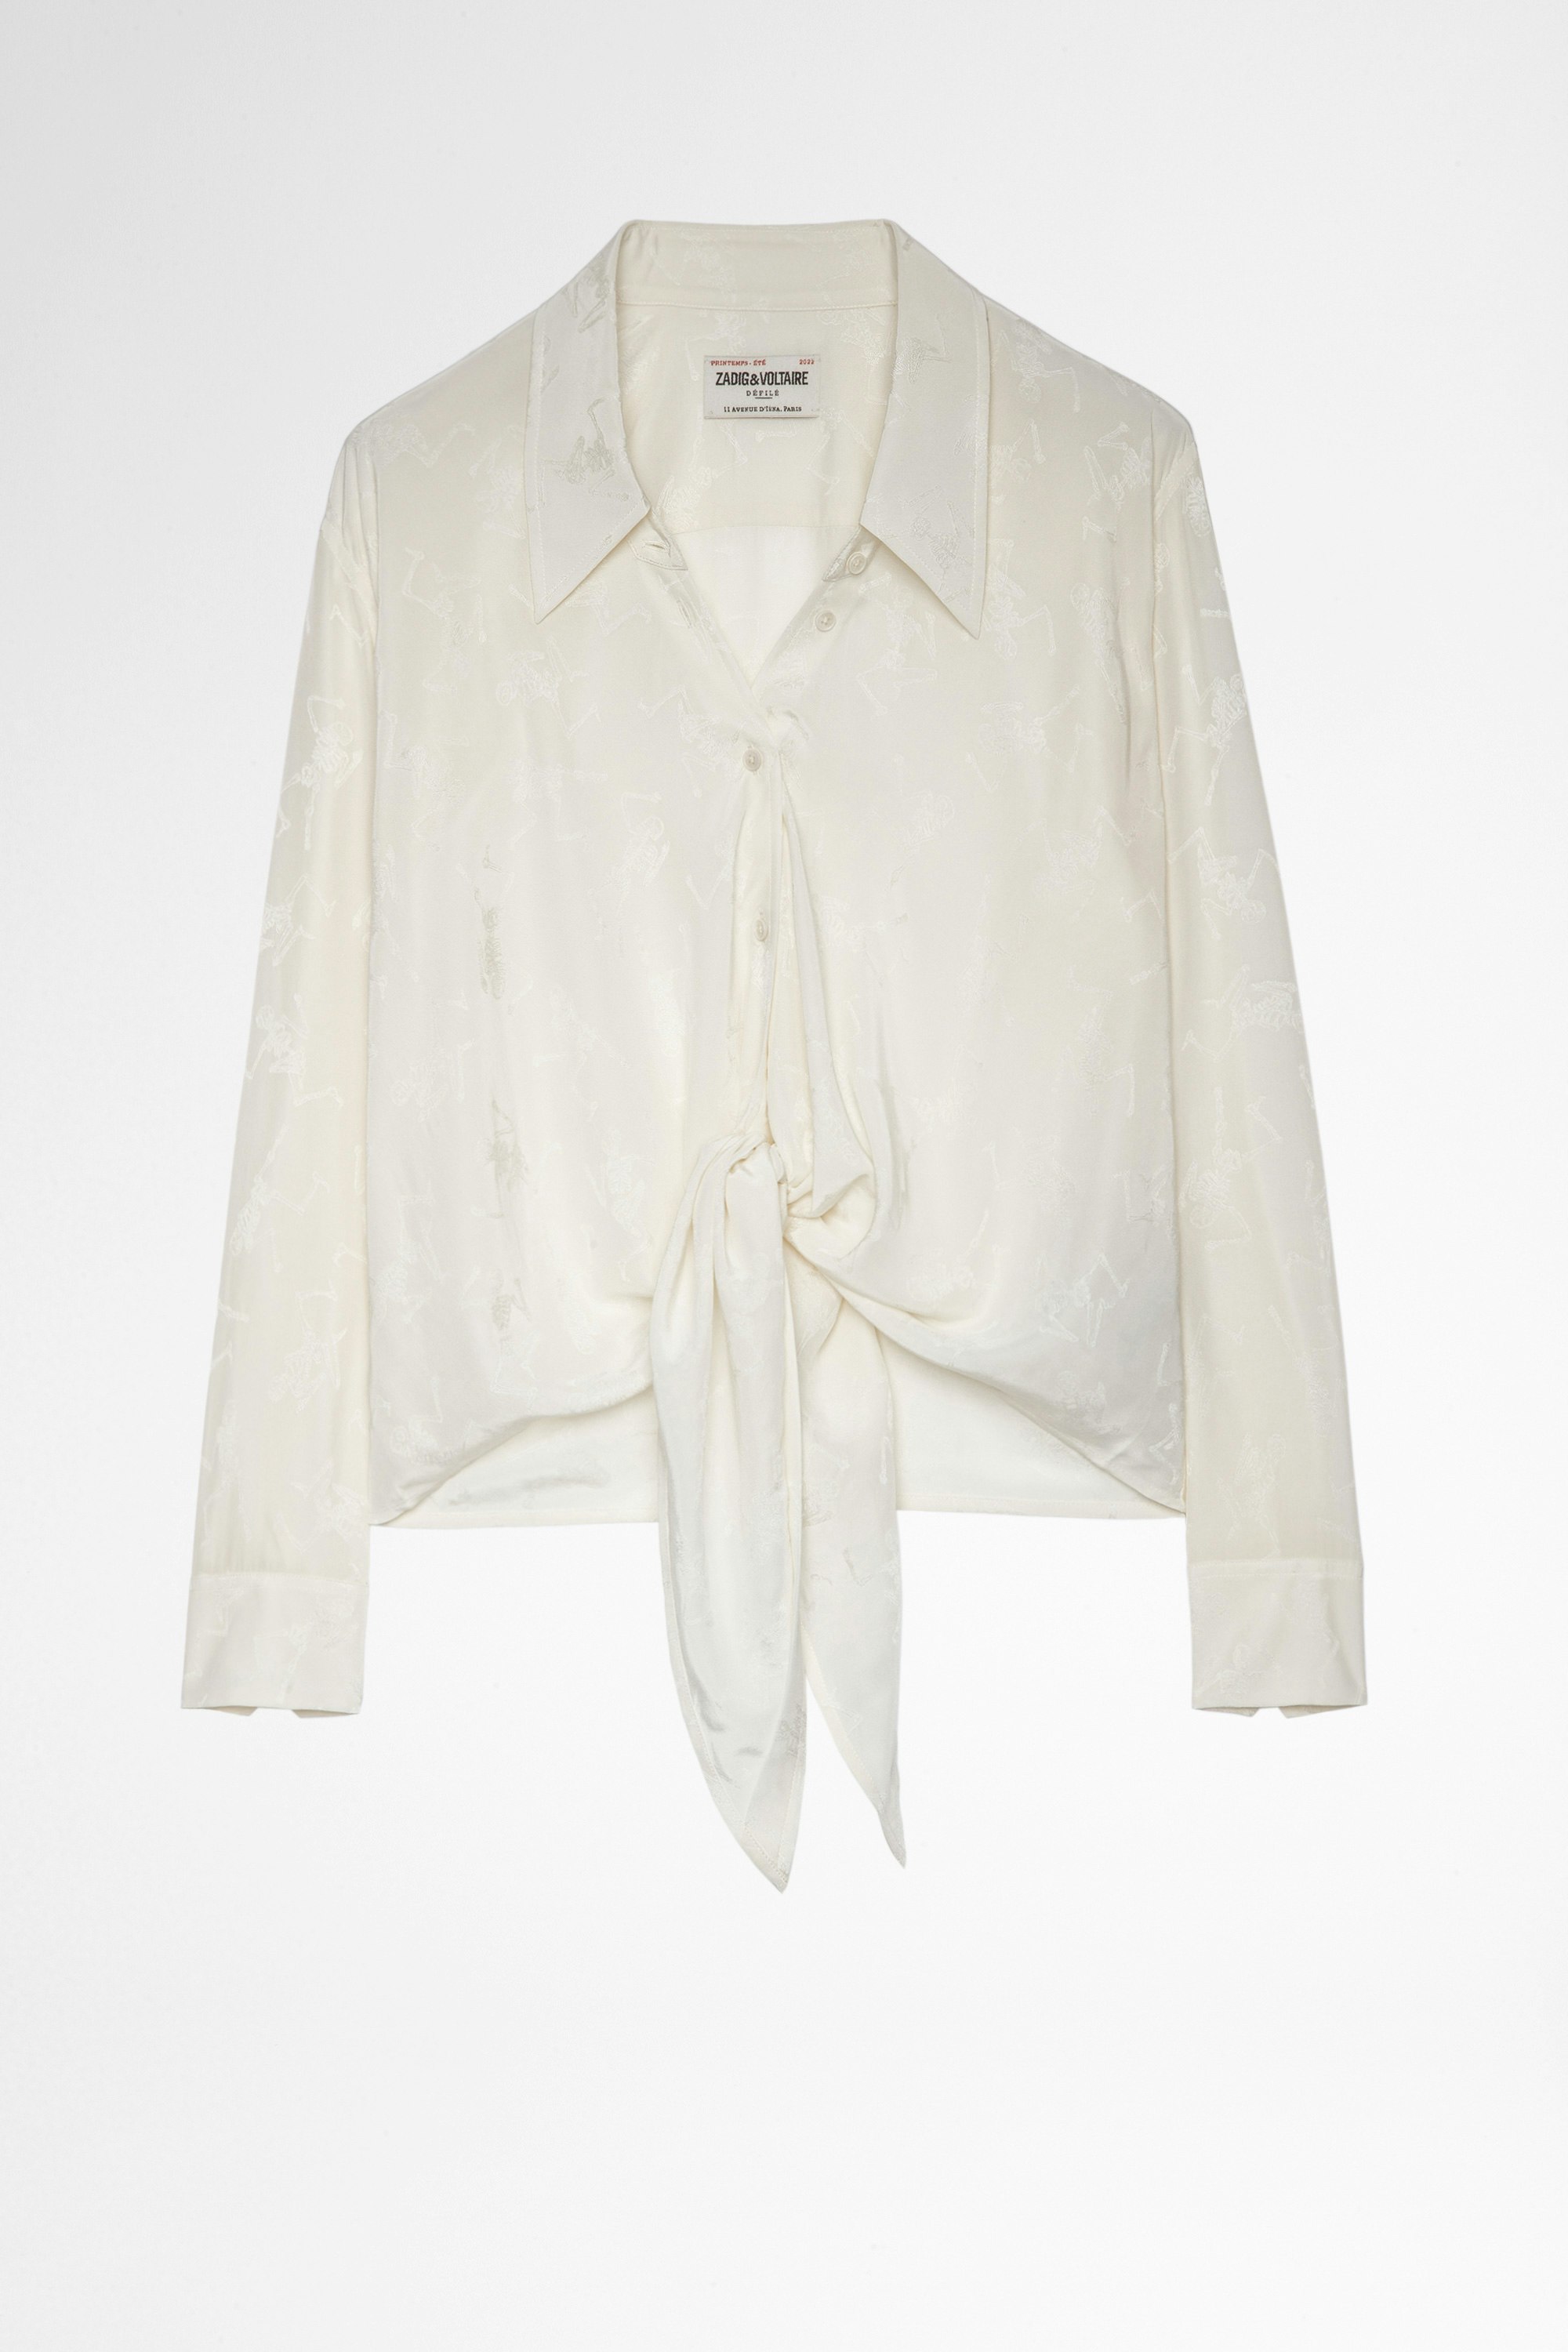 Women's chic blouses, camisoles, shirts and tops | Zadig&Voltaire